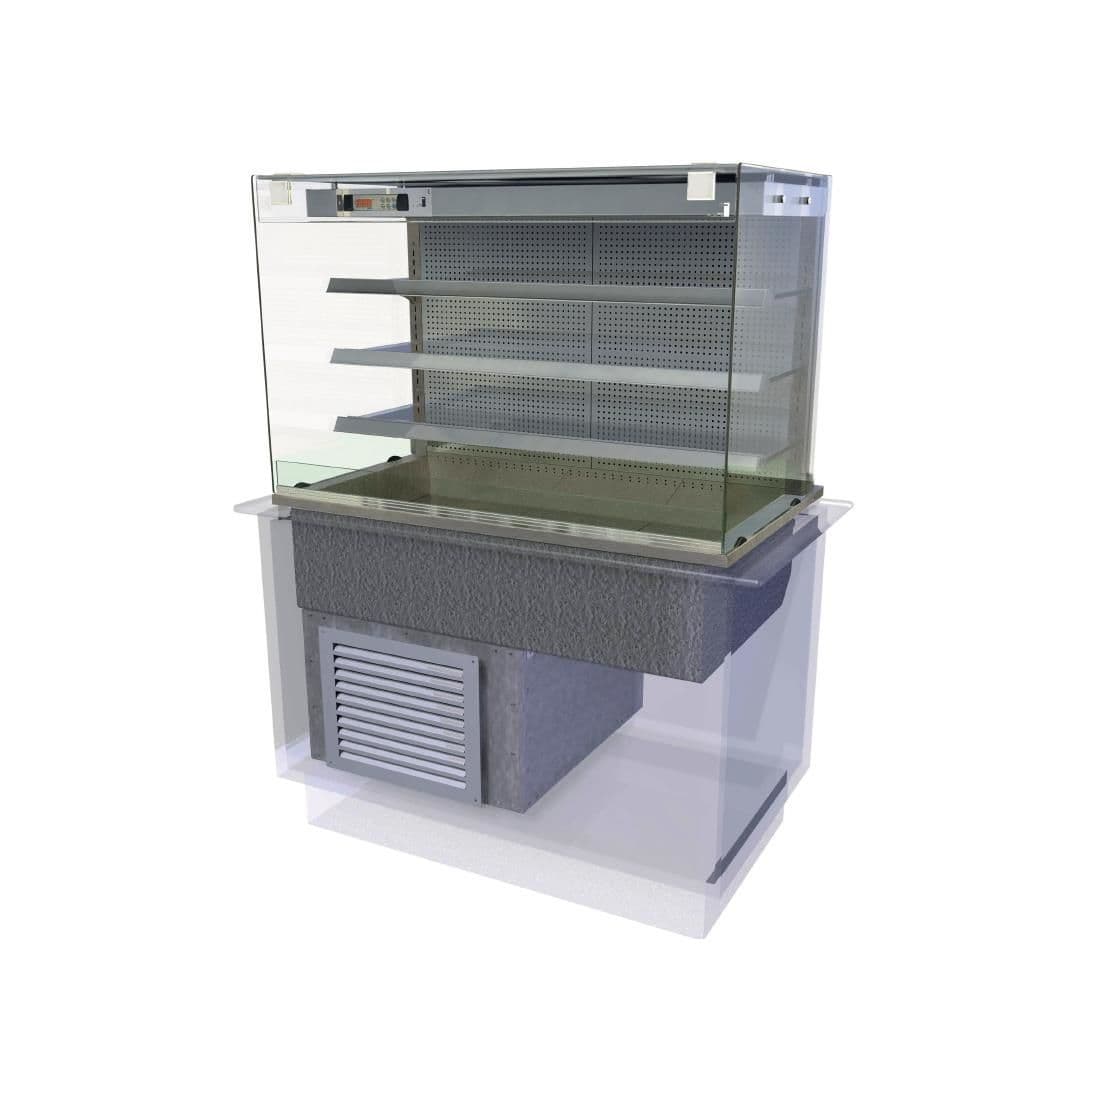 CW644 Kubus Drop In Multideck Self Service 1175mm JD Catering Equipment Solutions Ltd